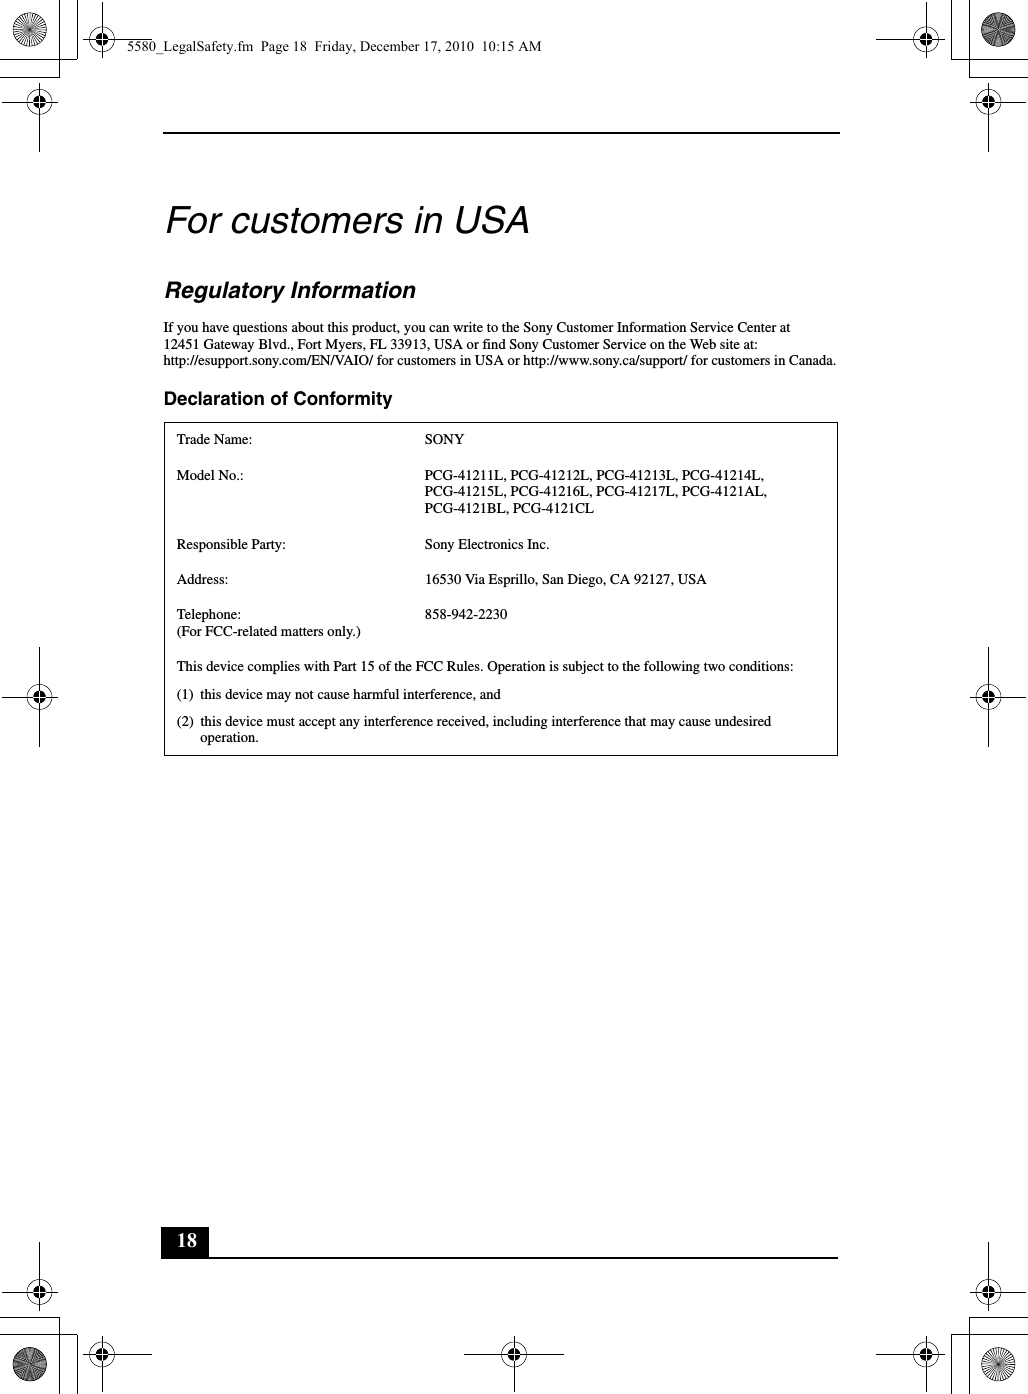 18For customers in USARegulatory InformationIf you have questions about this product, you can write to the Sony Customer Information Service Center at12451 Gateway Blvd., Fort Myers, FL 33913, USA or find Sony Customer Service on the Web site at:http://esupport.sony.com/EN/VAIO/ for customers in USA or http://www.sony.ca/support/ for customers in Canada.Declaration of ConformityTrade Name: SONYModel No.: PCG-41211L, PCG-41212L, PCG-41213L, PCG-41214L, PCG-41215L, PCG-41216L, PCG-41217L, PCG-4121AL, PCG-4121BL, PCG-4121CLResponsible Party:  Sony Electronics Inc.Address: 16530 Via Esprillo, San Diego, CA 92127, USATelephone: (For FCC-related matters only.)858-942-2230This device complies with Part 15 of the FCC Rules. Operation is subject to the following two conditions: (1) this device may not cause harmful interference, and(2) this device must accept any interference received, including interference that may cause undesired operation.5580_LegalSafety.fm  Page 18  Friday, December 17, 2010  10:15 AM